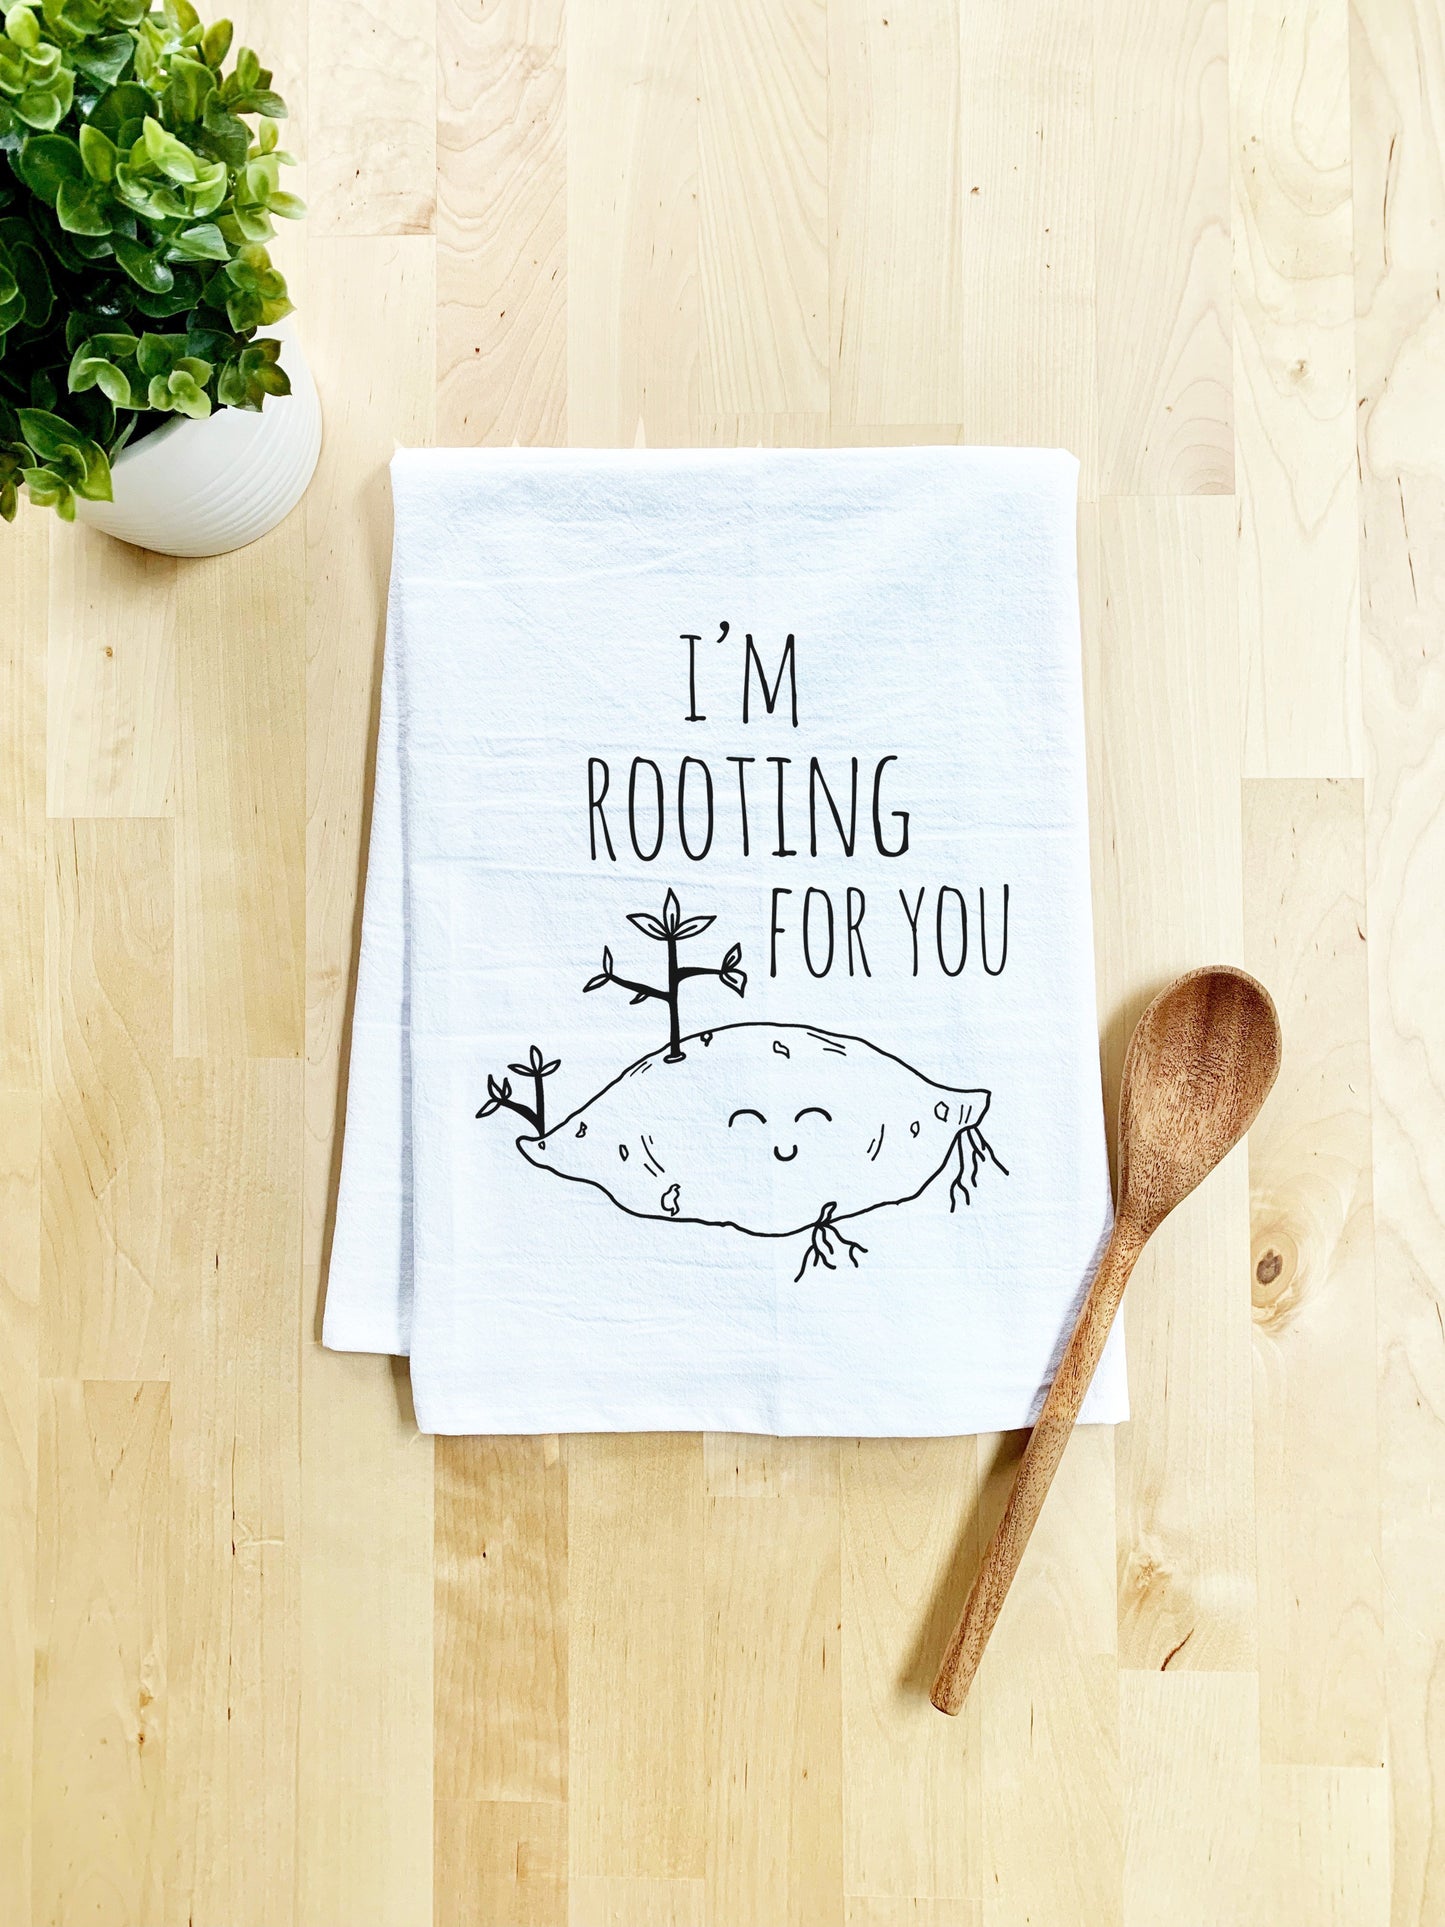 I'm Rooting For You Dish Towel - White Or Gray - MoonlightMakers